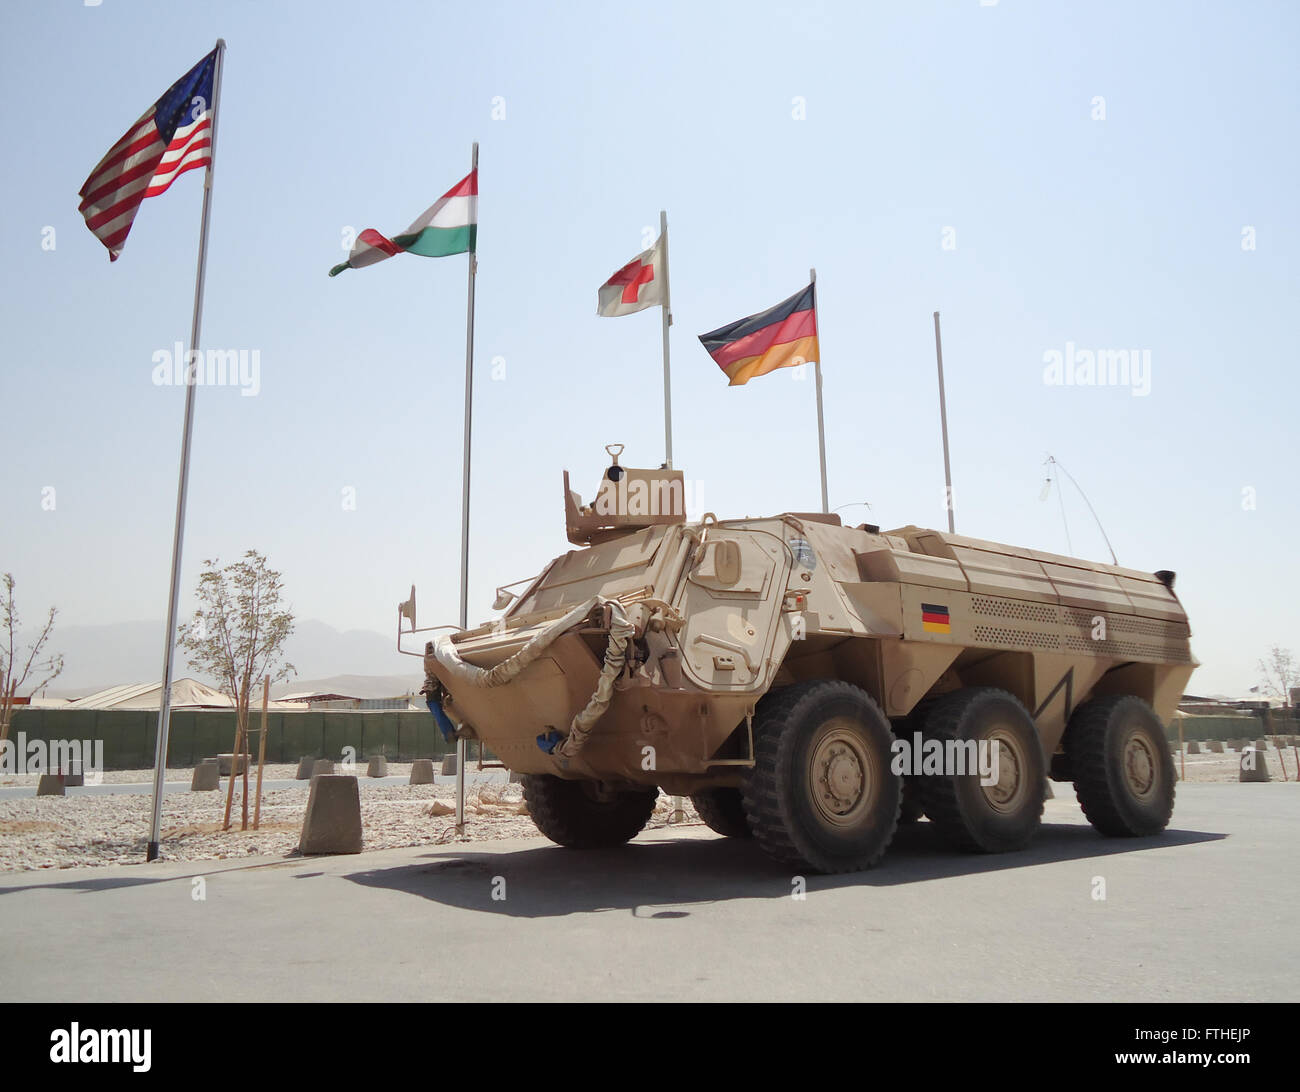 german armored ambulance vehicle  fuchs  in front of national flags Stock Photo